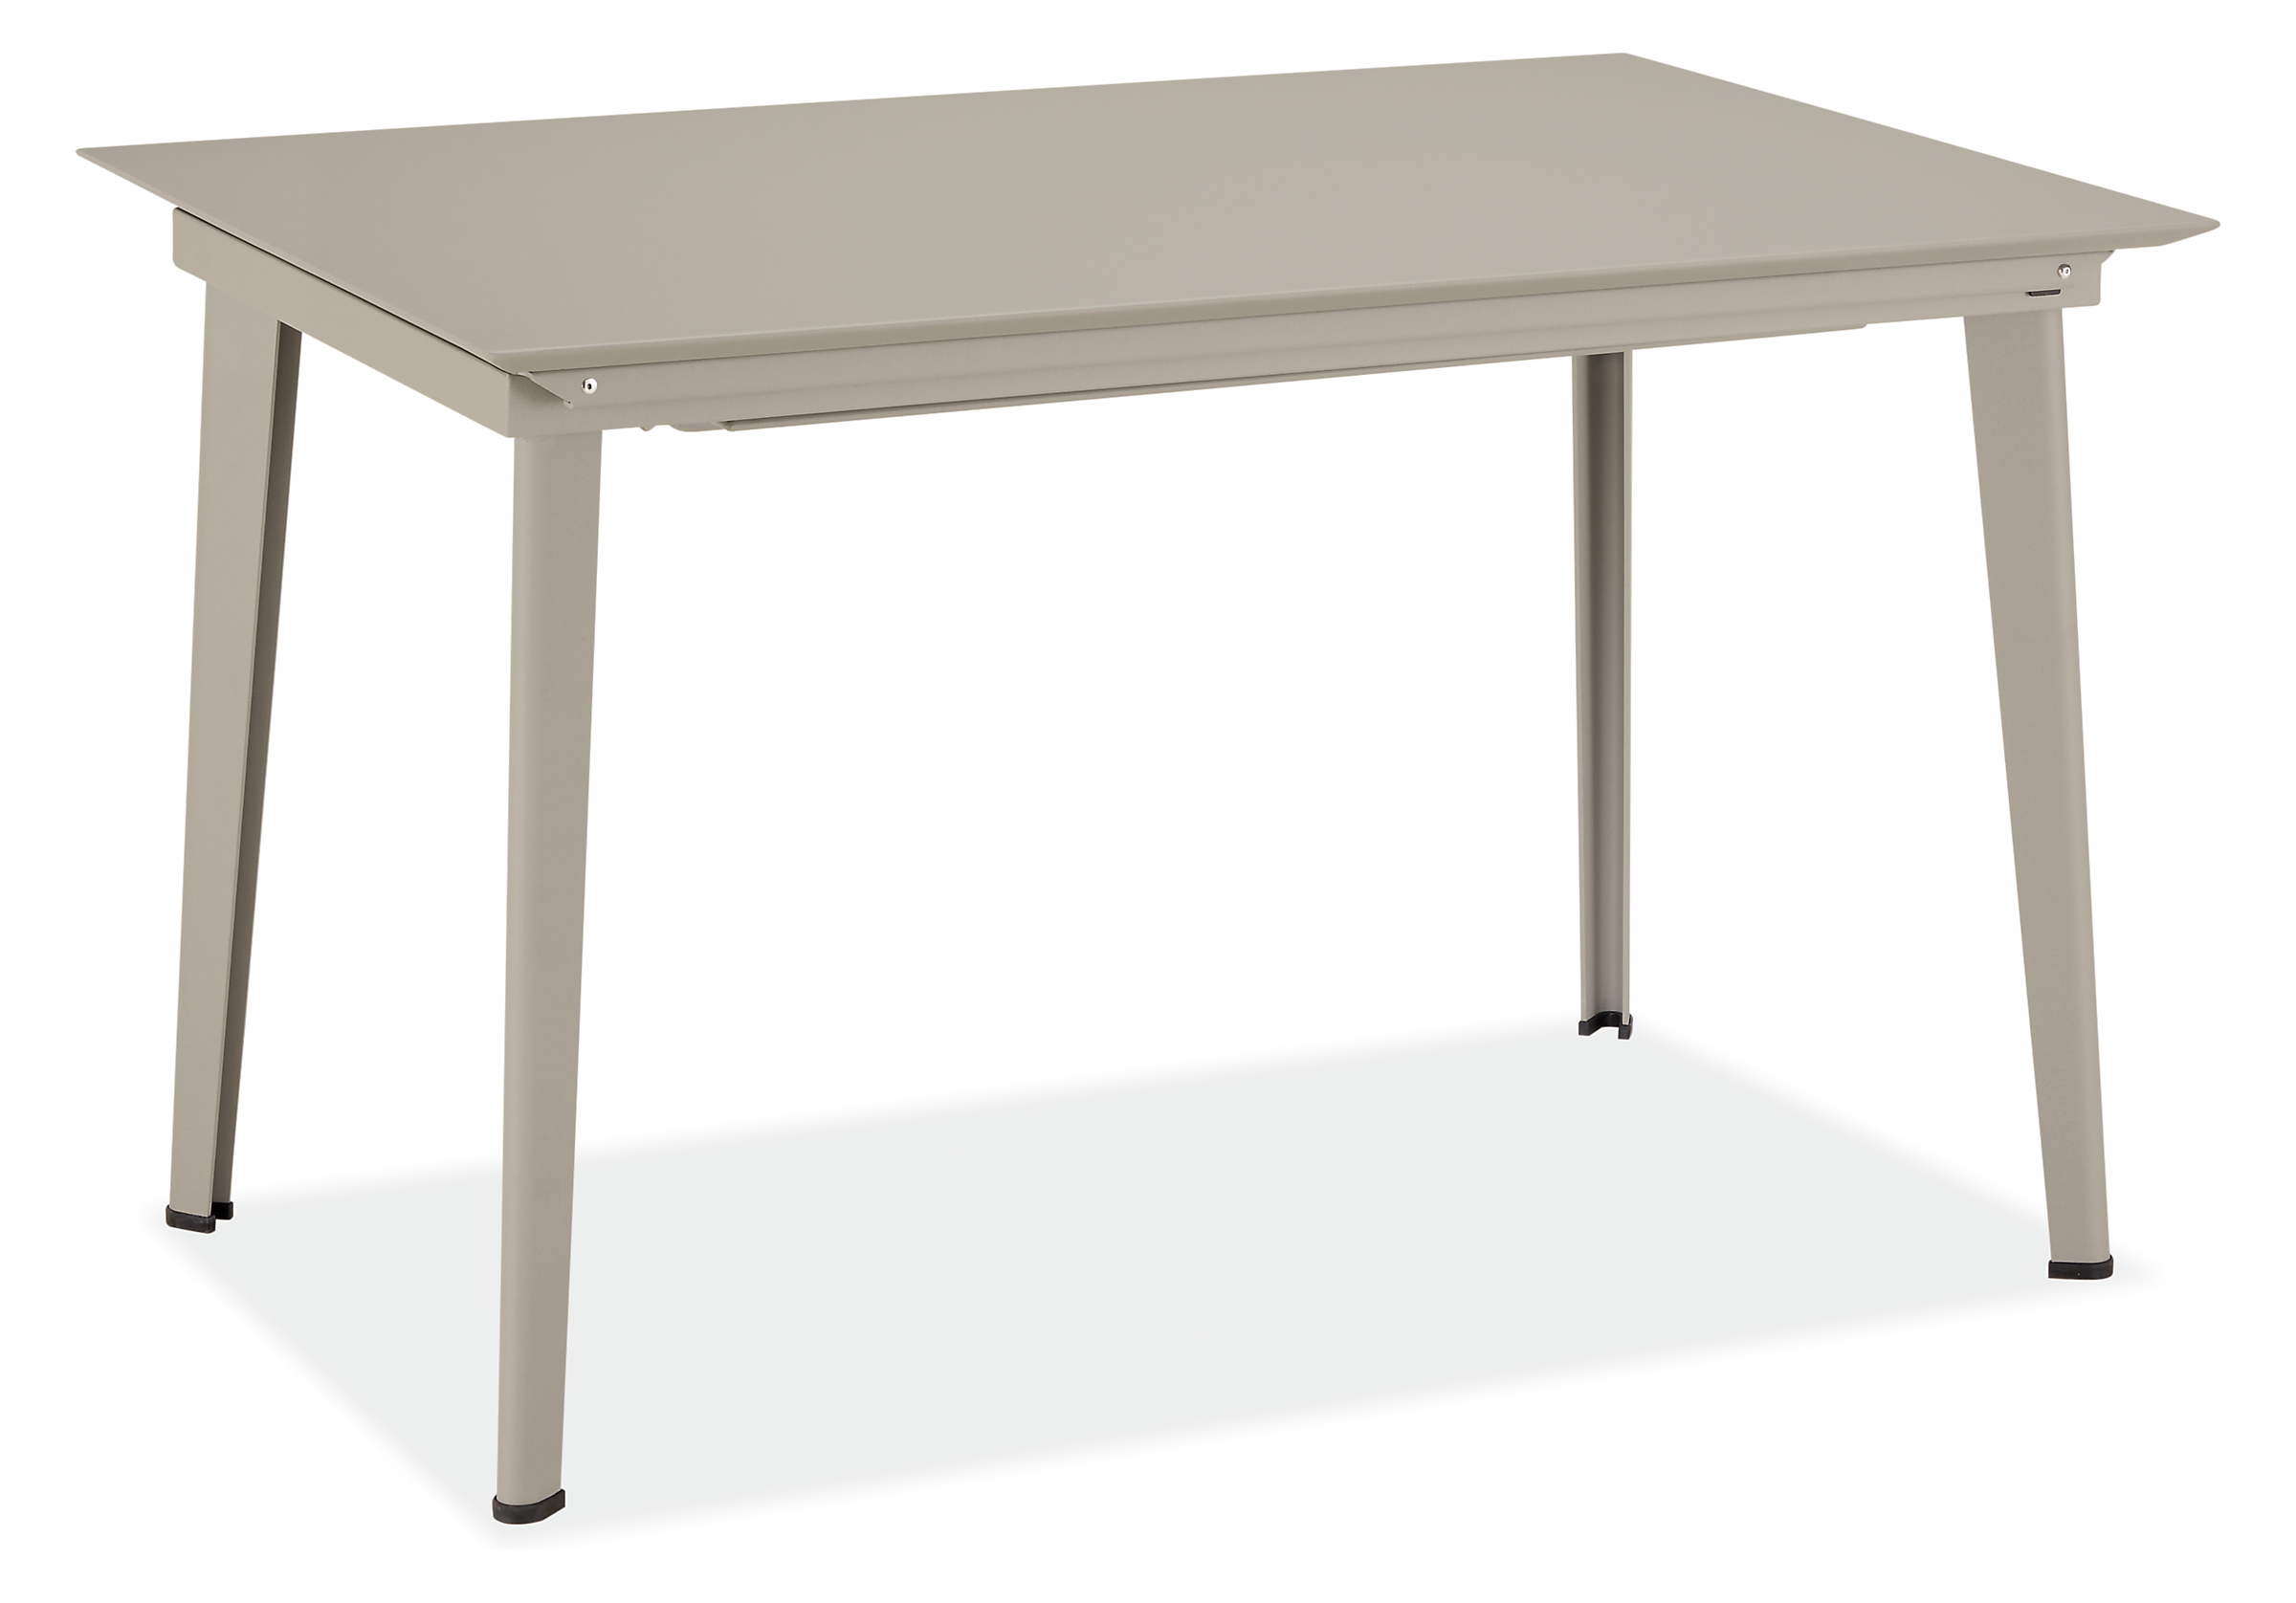 Bauer 47w 31d 29h Extension Table with One 20" Leaf